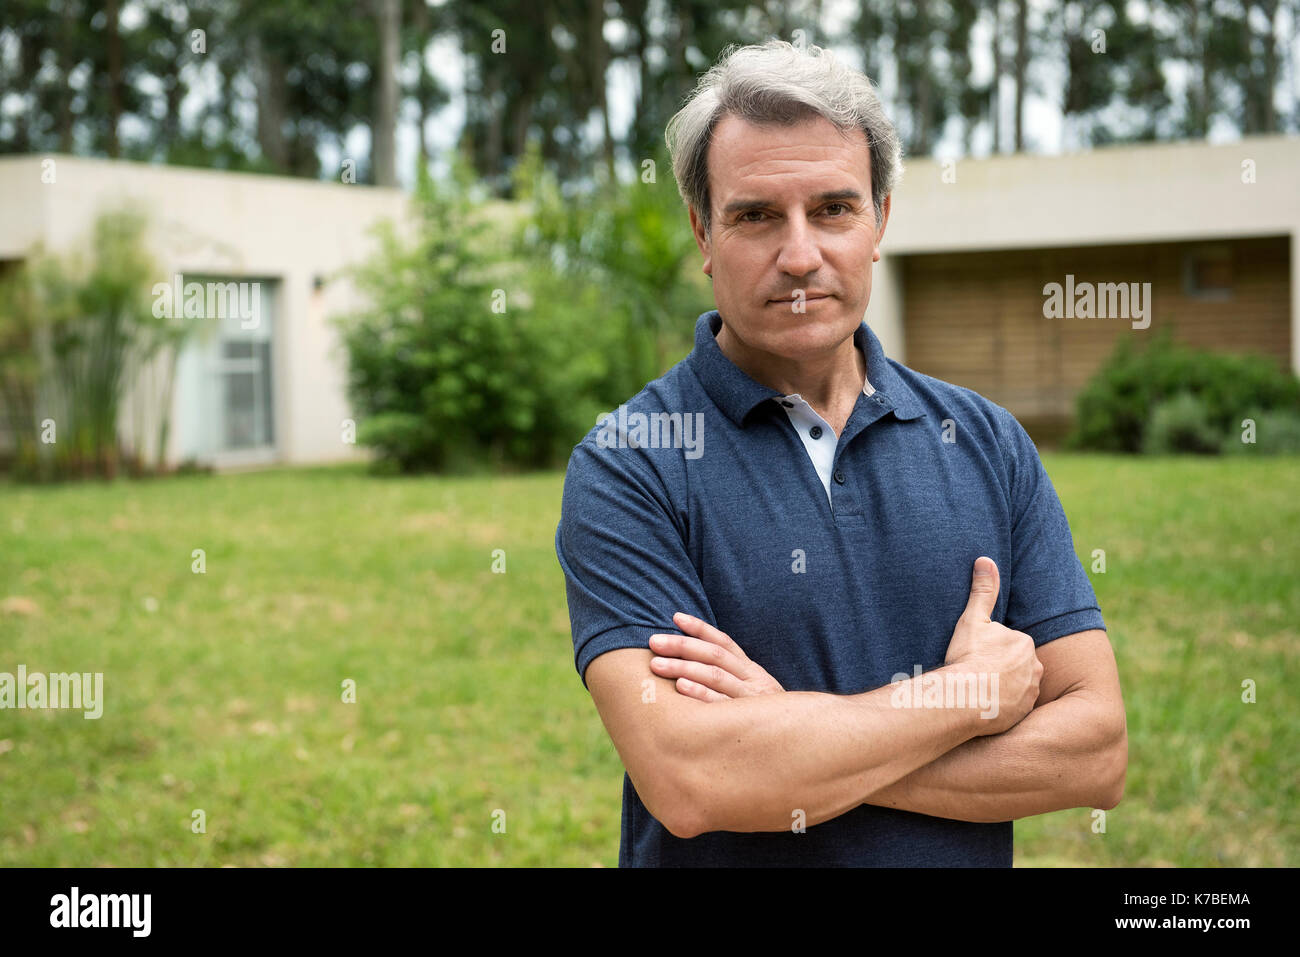 Mature man with arms folded across chest, portrait Stock Photo